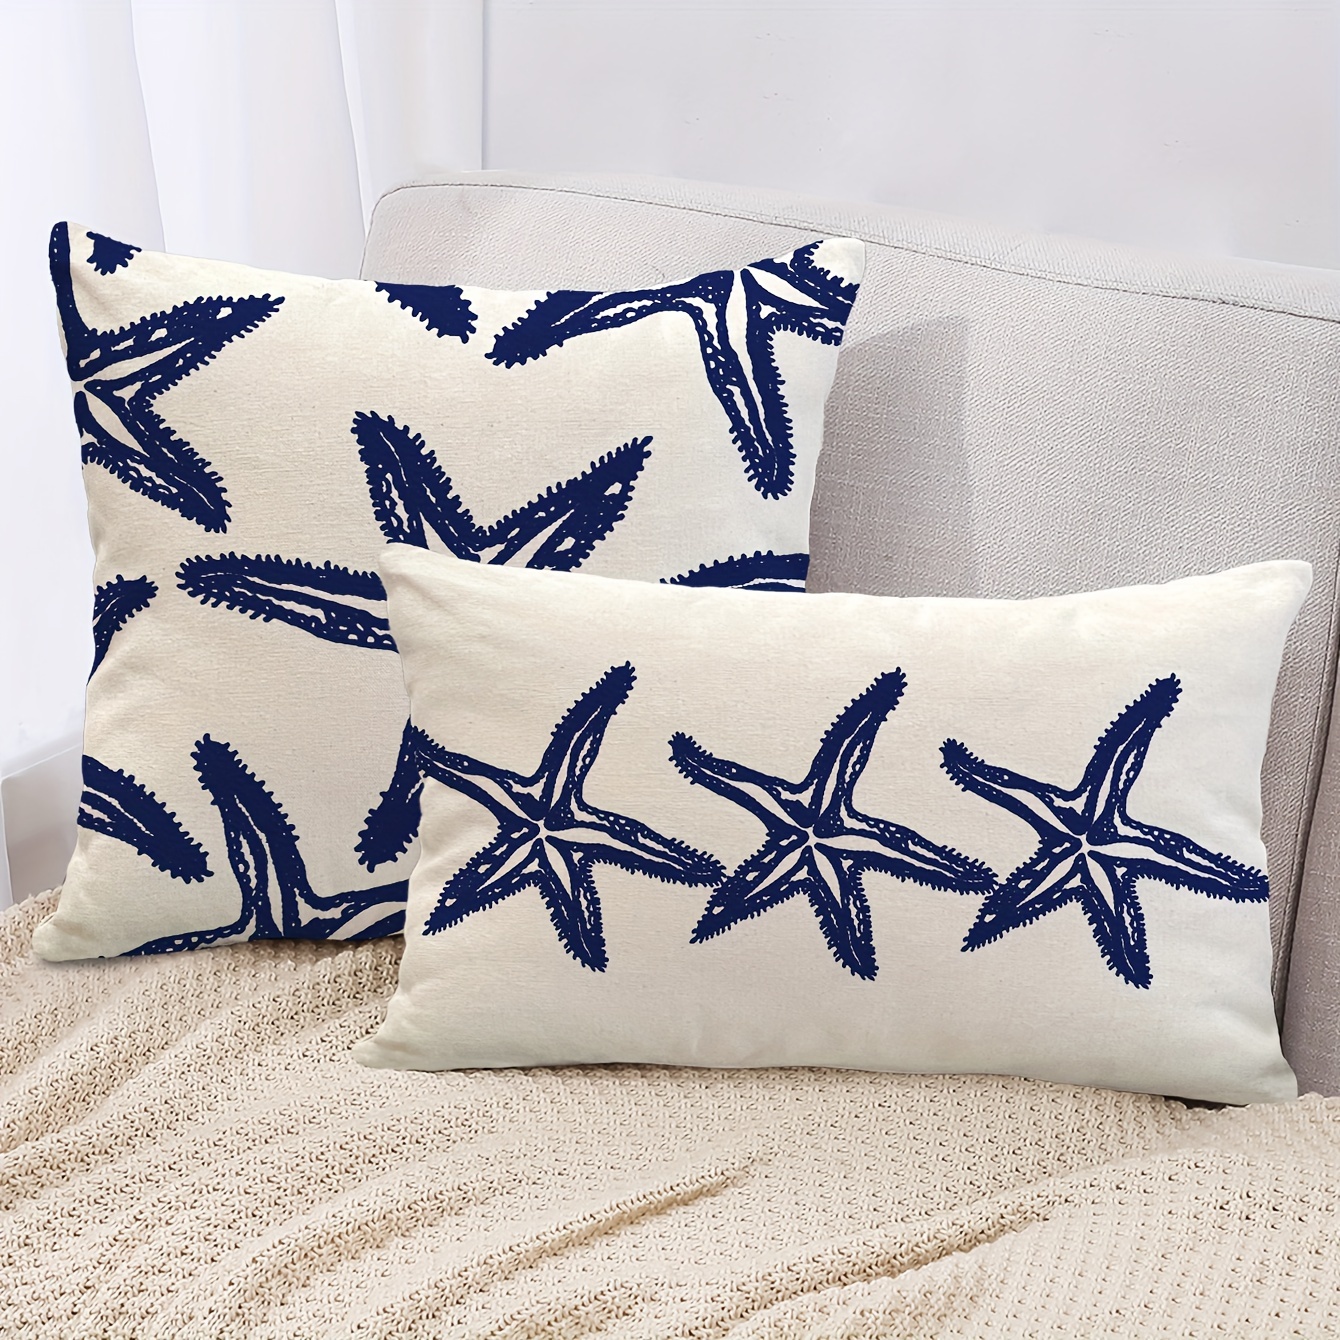 

1pc, Modern Starfish Pillow Cover For Sofa, Living Room, Bed, Couch - Soft And Stylish Home Decor,without Pillow Insert